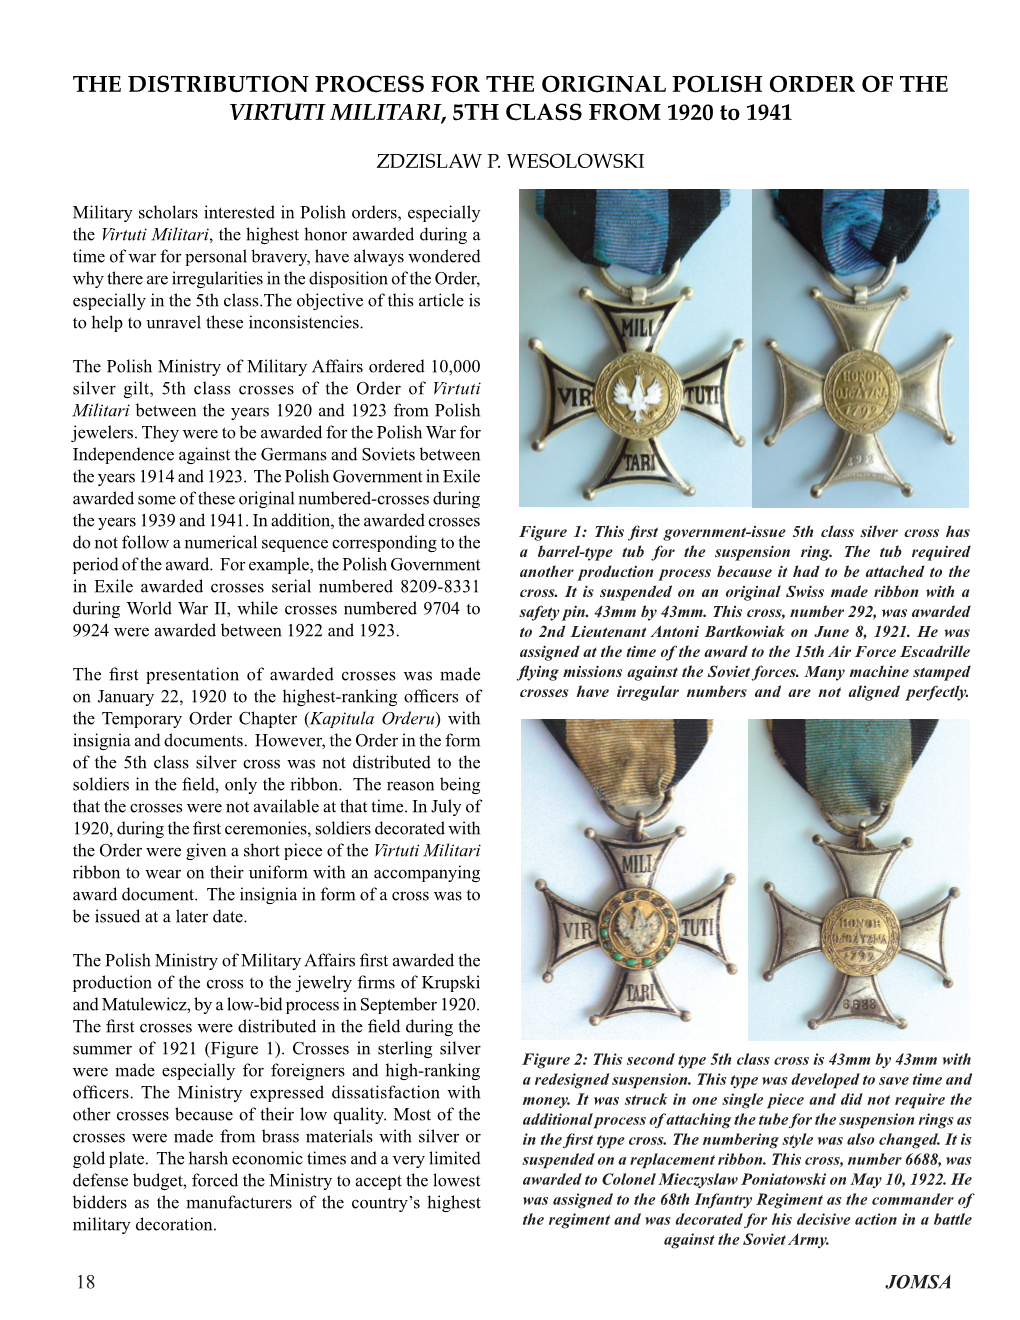 THE DISTRIBUTION PROCESS for the ORIGINAL POLISH ORDER of the VIRTUTI MILITARI, 5TH CLASS from 1920 to 1941